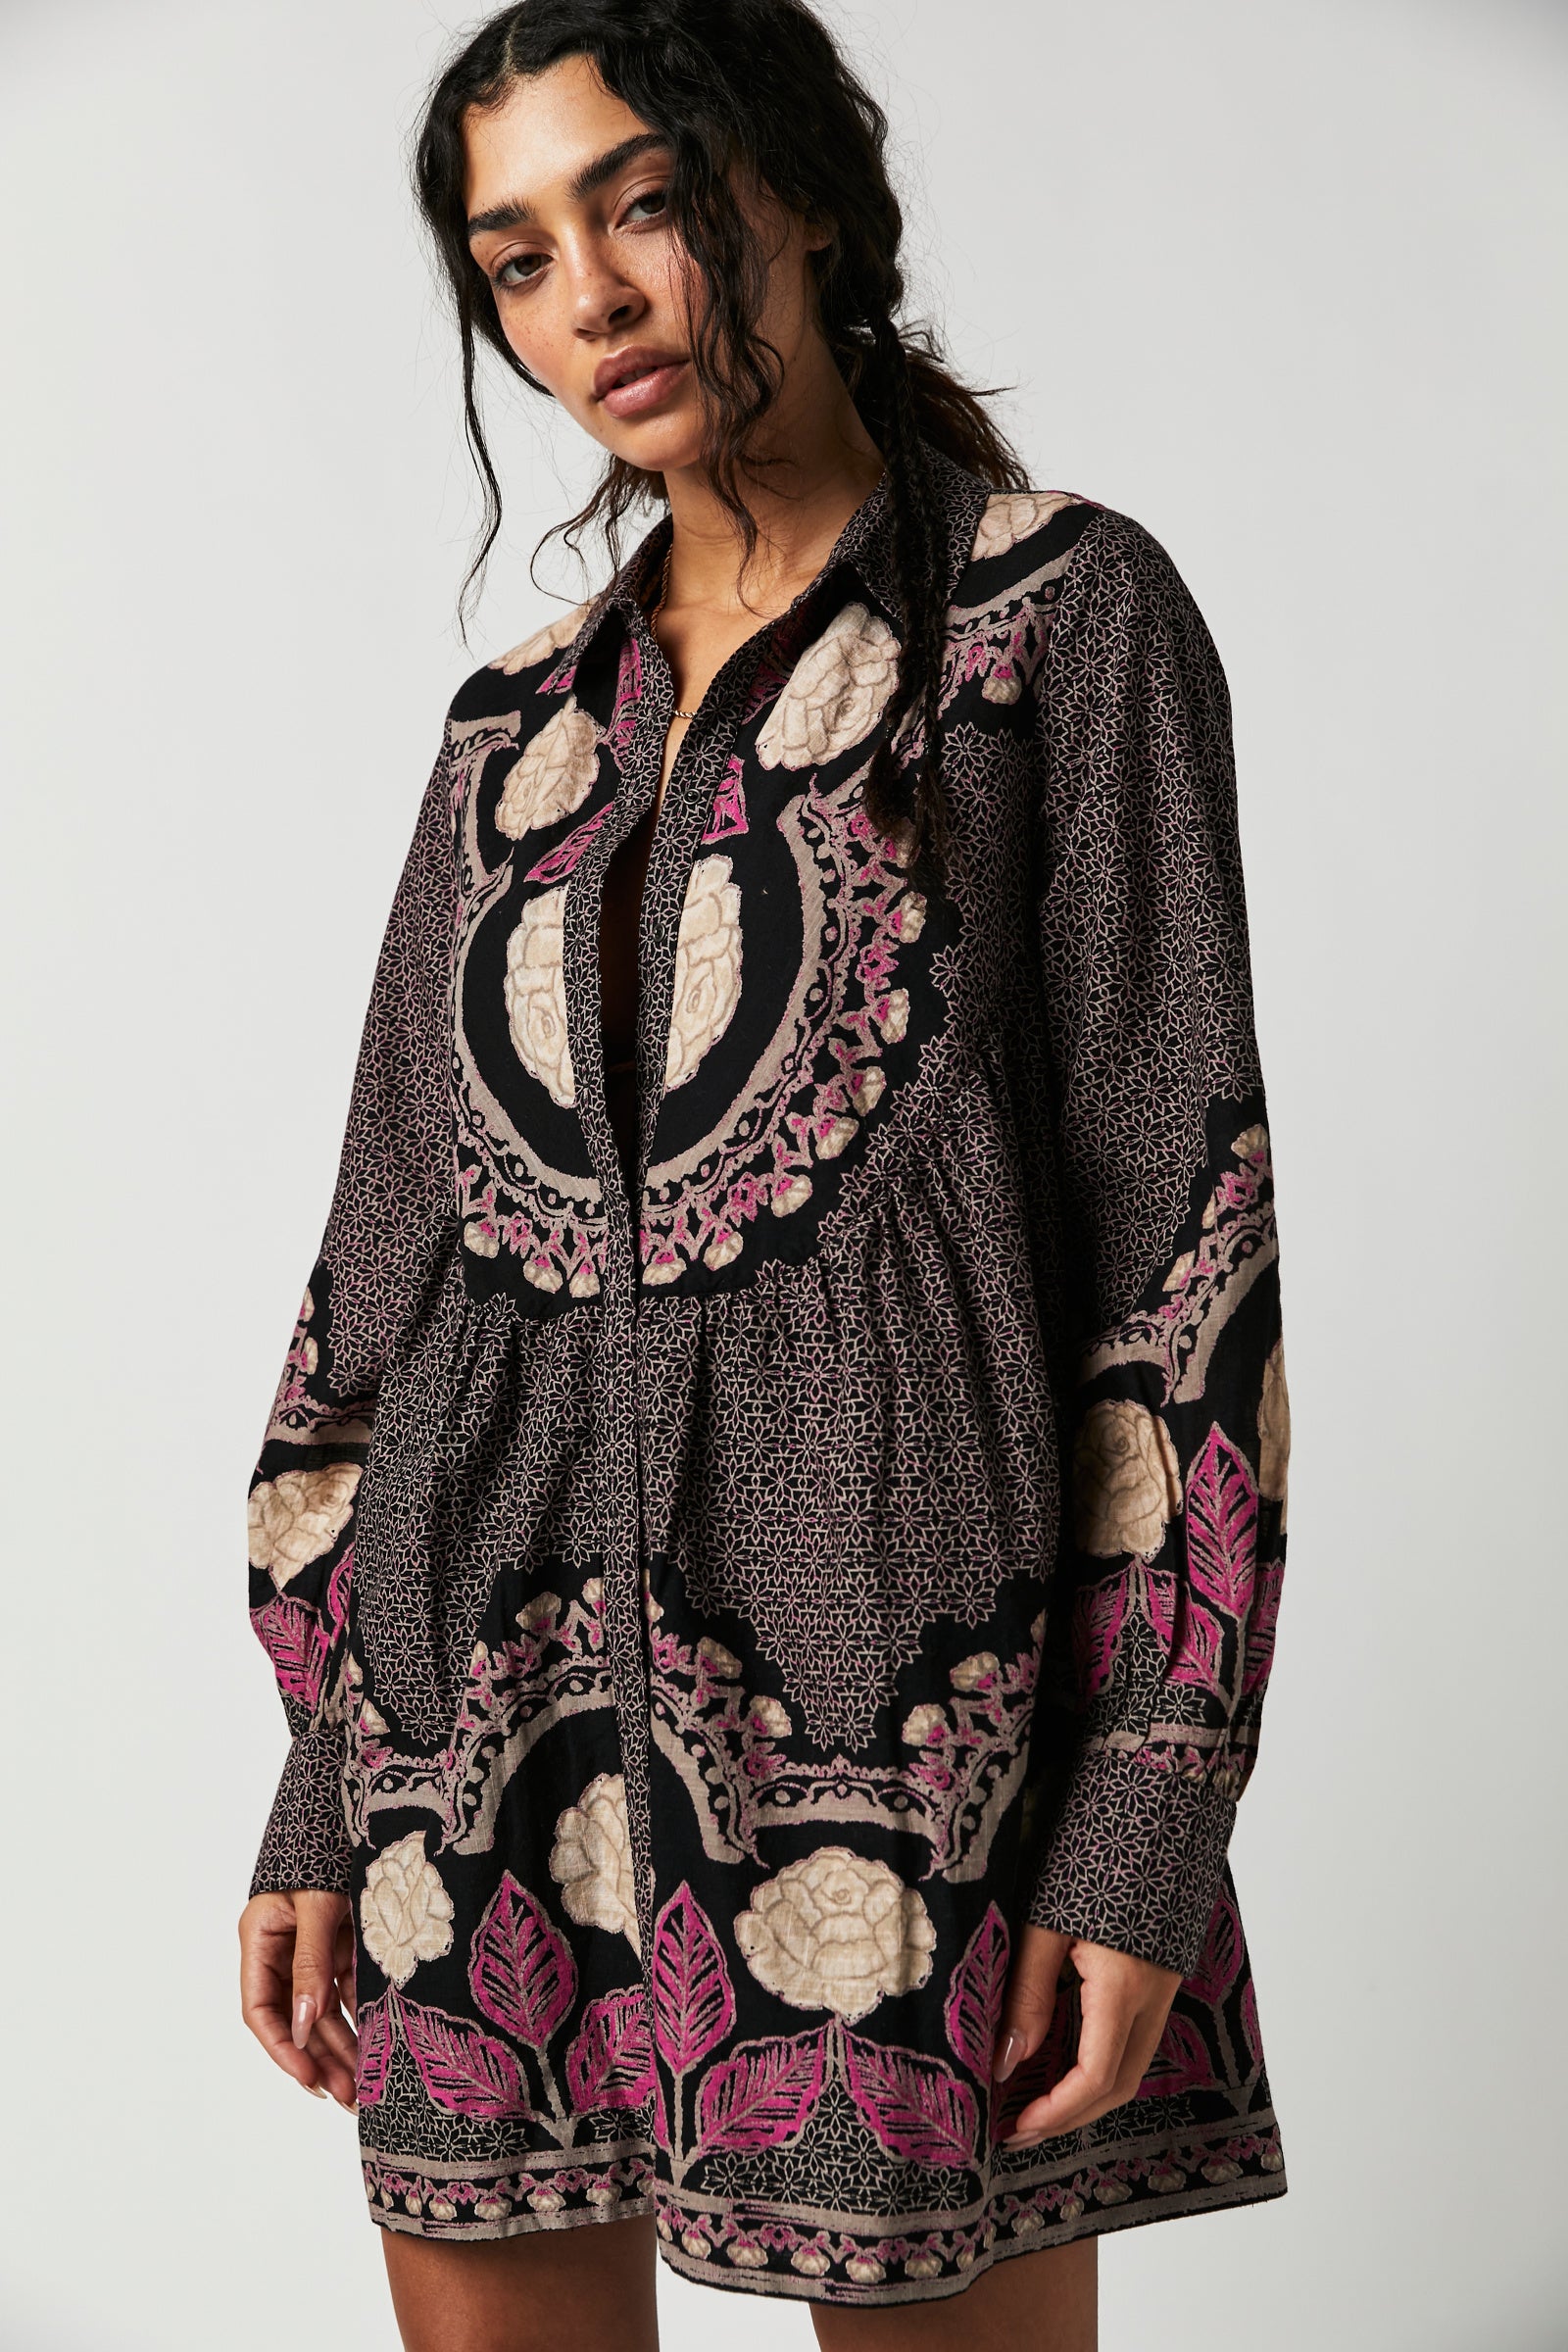 FREE PEOPLE SMELL THE ROSES MINI DRESS